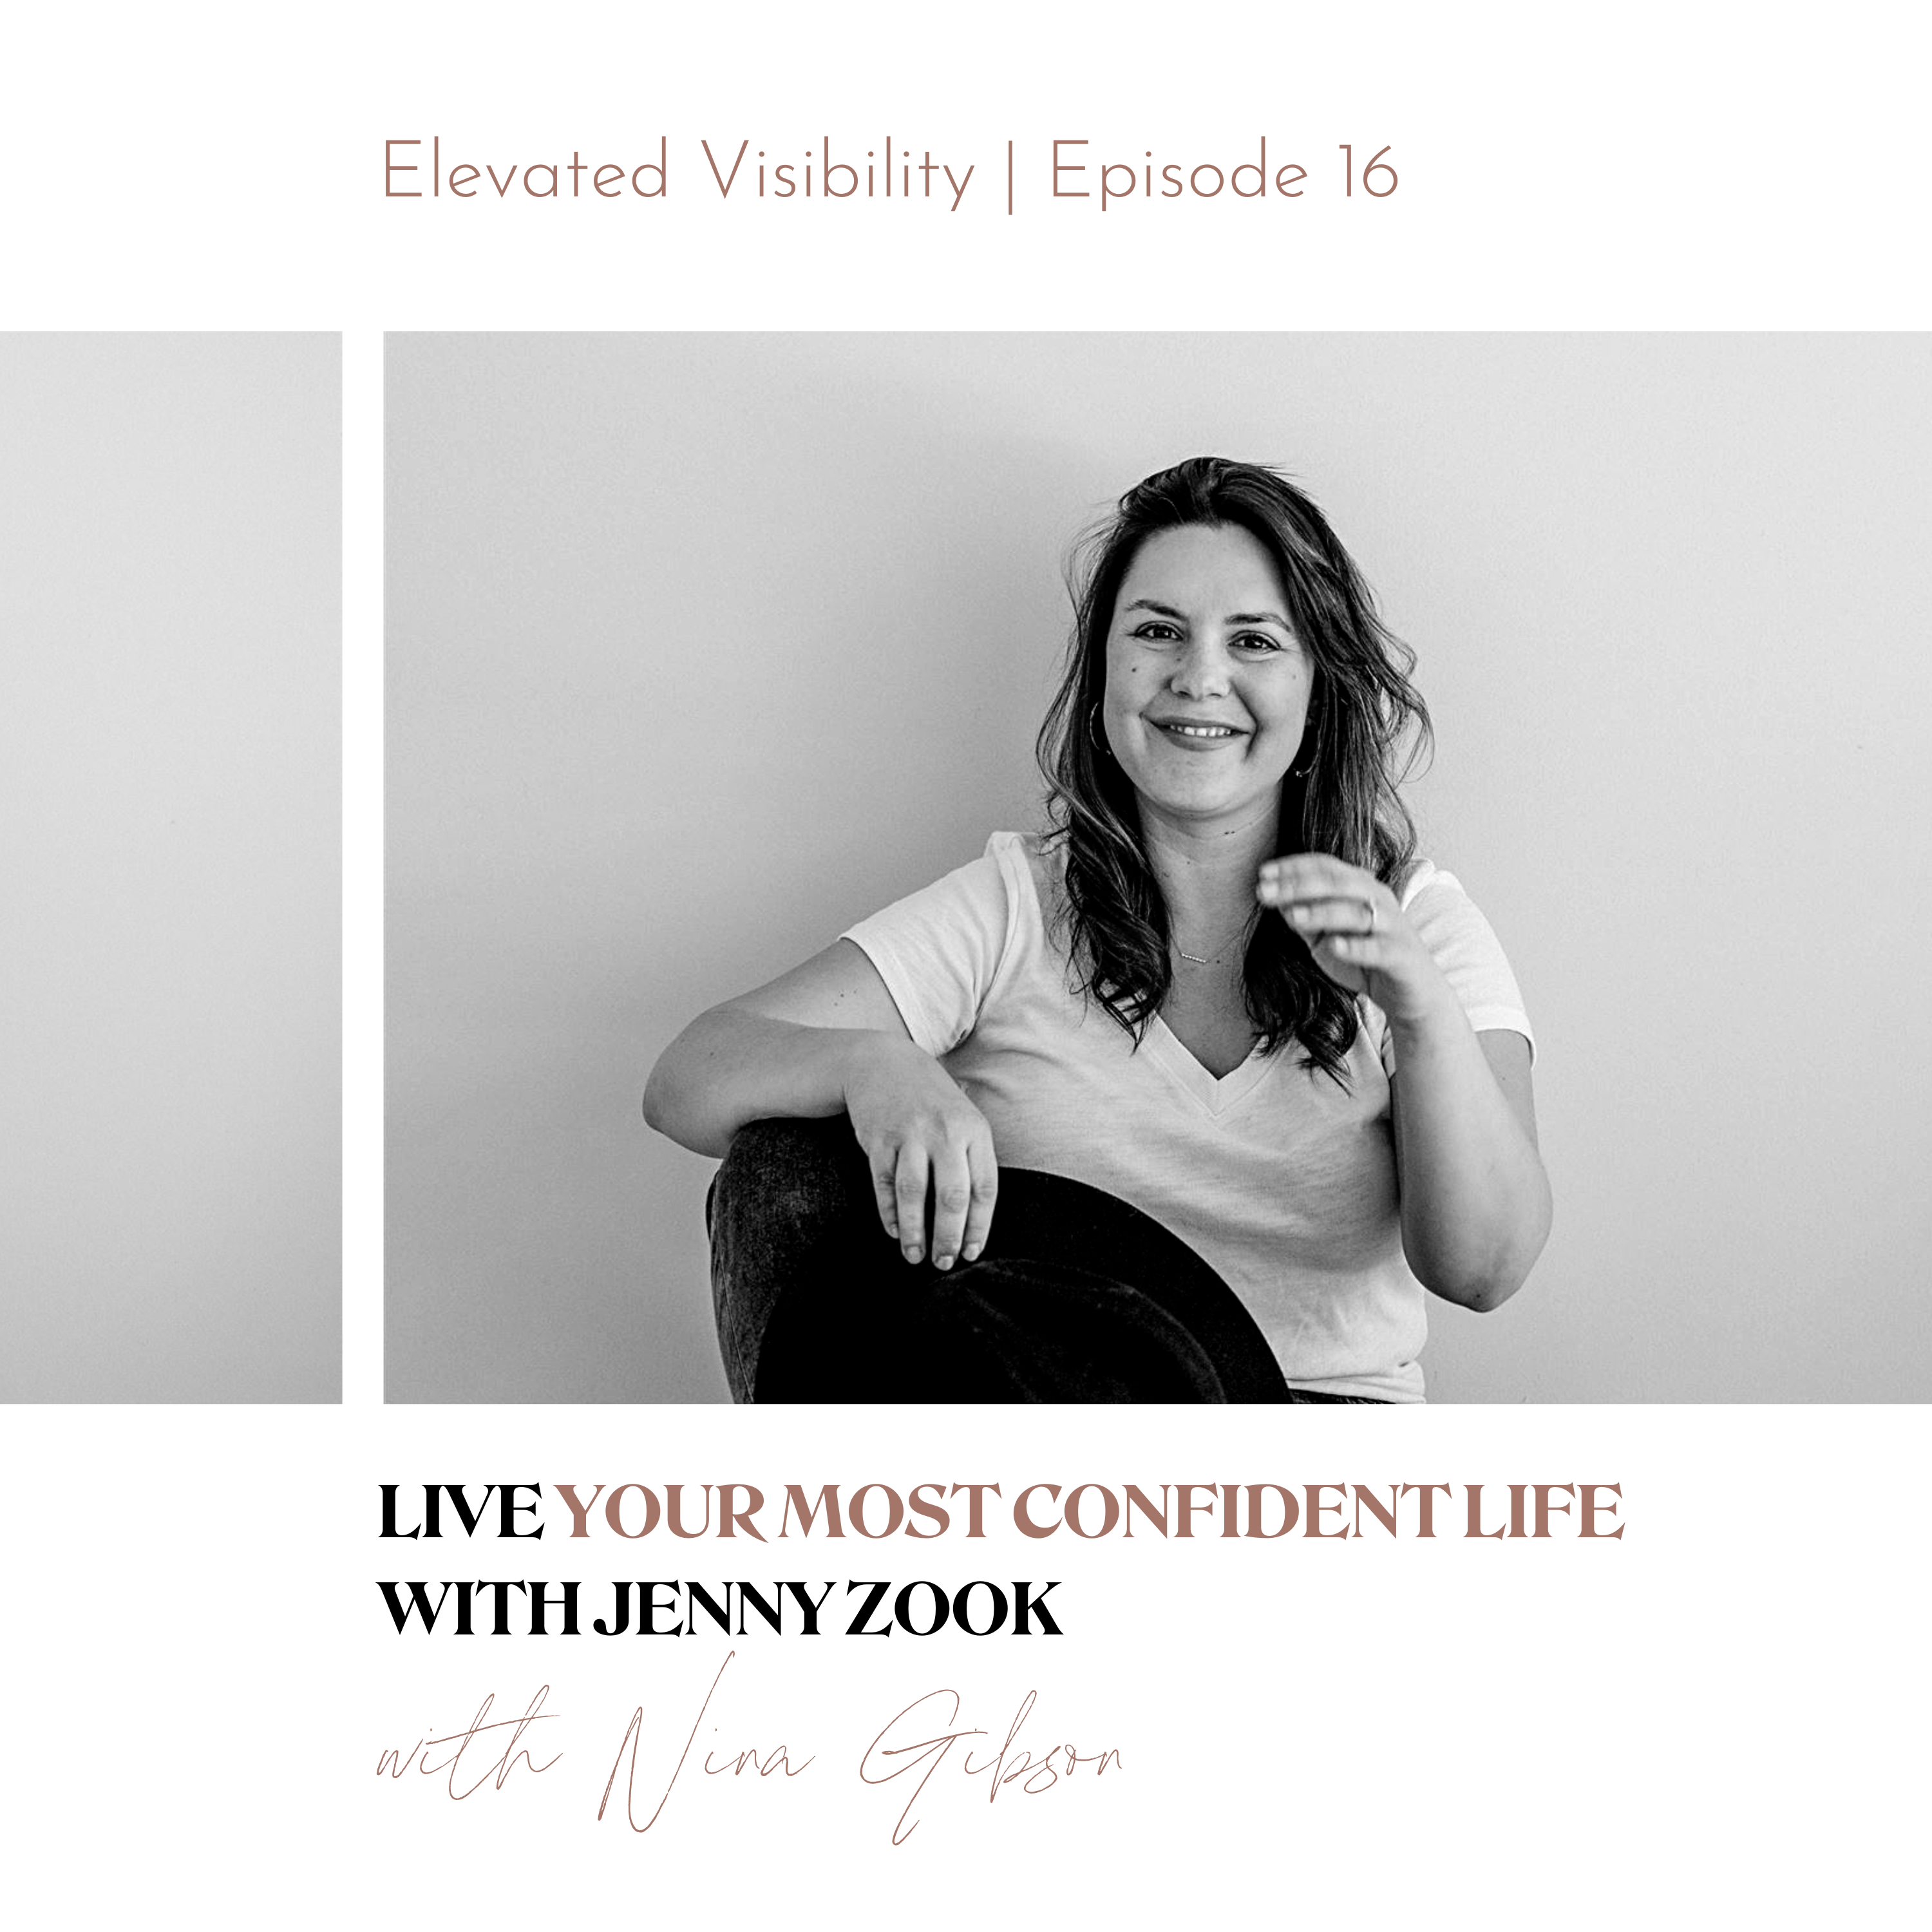 Cover Image for the Elevated Visibility Podcast E16